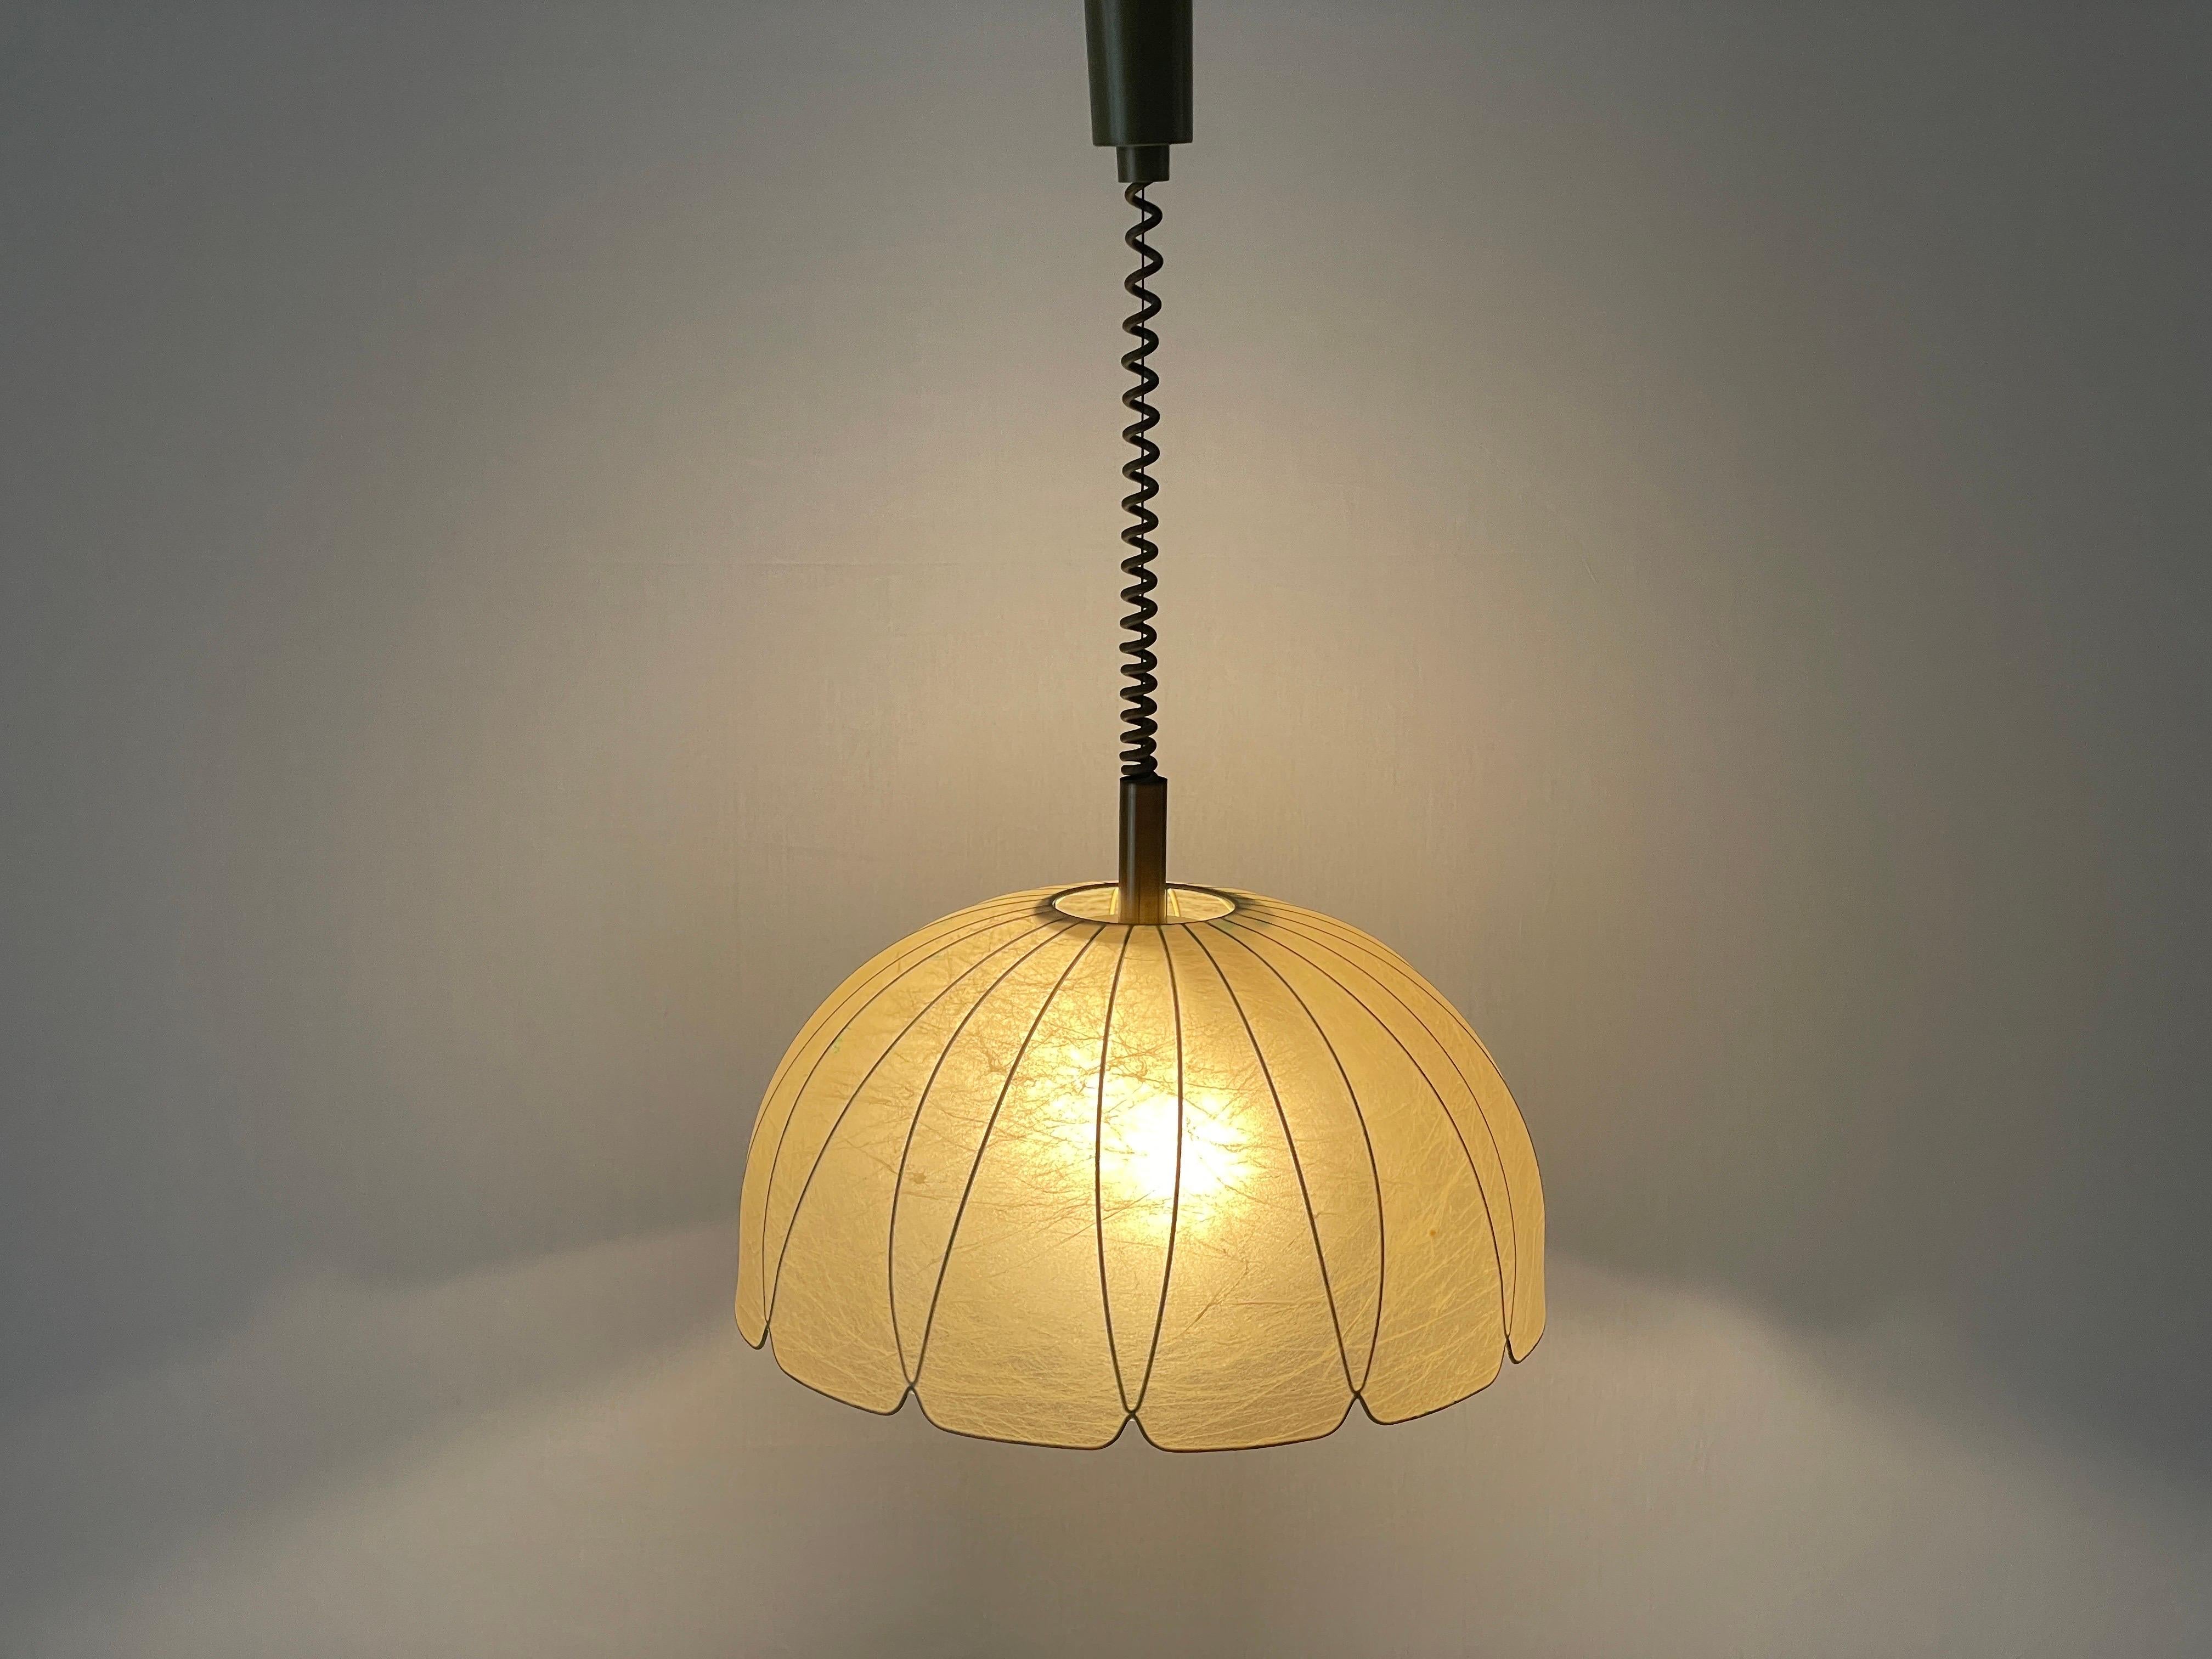 Flower Design Cocoon Adjustable Height Pendant Lamp by Goldkant, 1960s, Germany For Sale 9